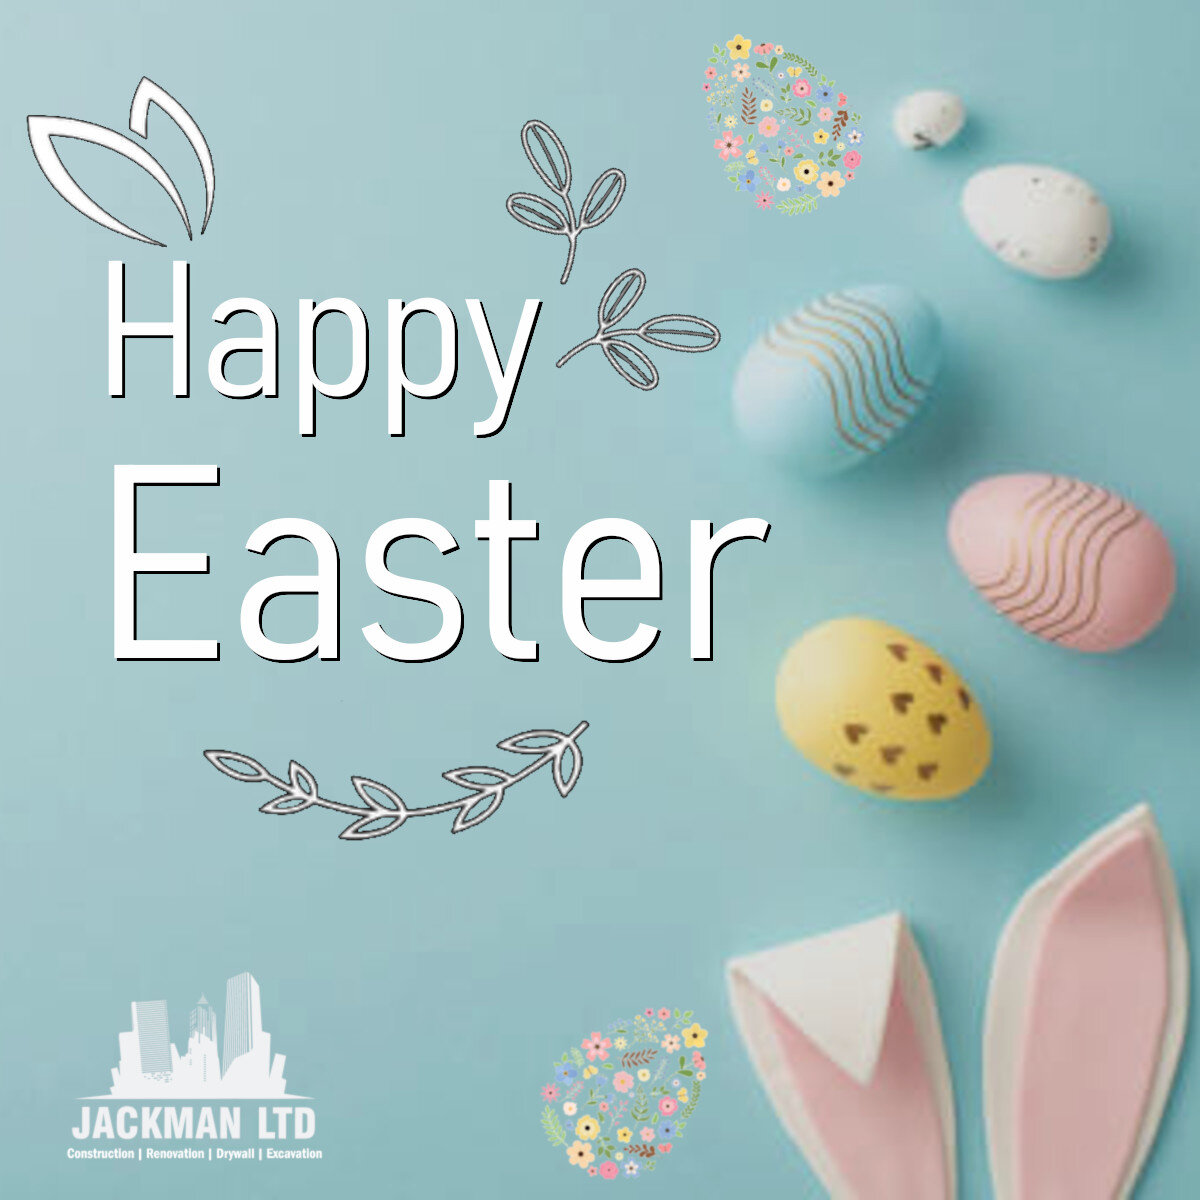 Hoppy Easter everyone 🐰 We are closed today but will reopen on Monday April 1st. No it's not an April Fool's joke - we will be here for you! Have a wonderful celebration with those who mean most and we will see you next month. #easter #familytime #h